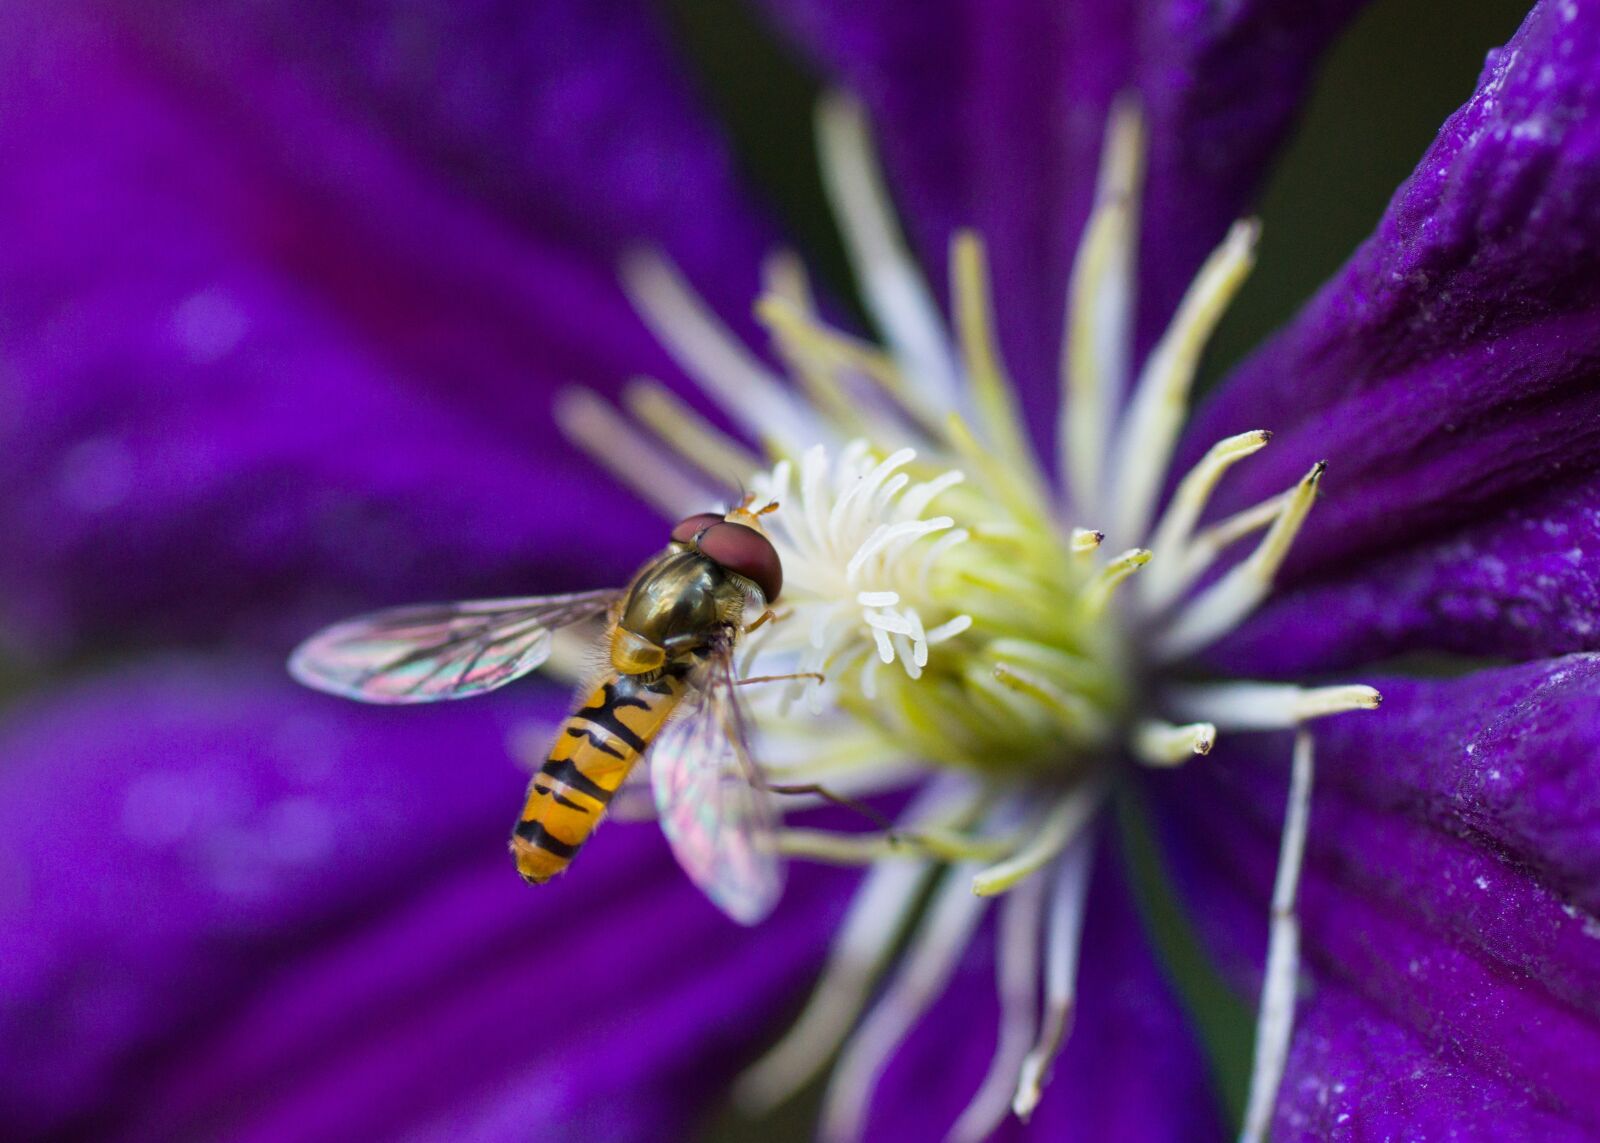 Sony SLT-A58 + Tamron SP AF 90mm F2.8 Di Macro sample photo. Hoverfly, insect, clematis photography